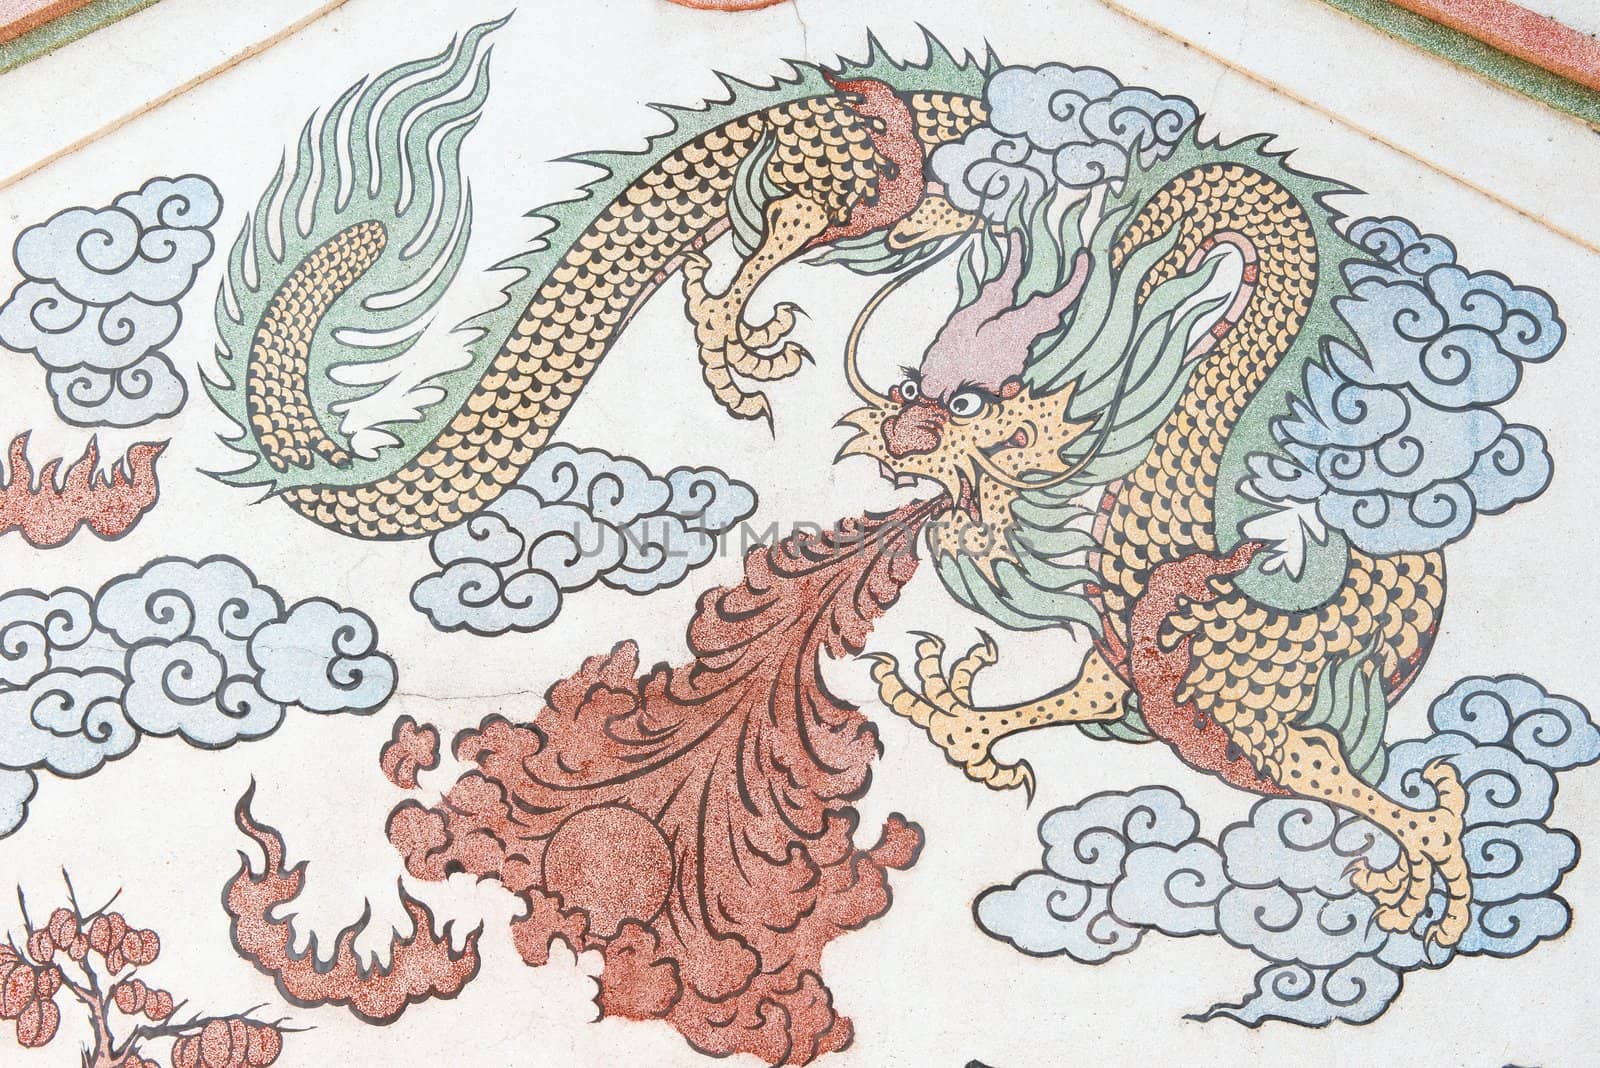 Chinese dragon picture drawing on temple wall taken on a sunny day